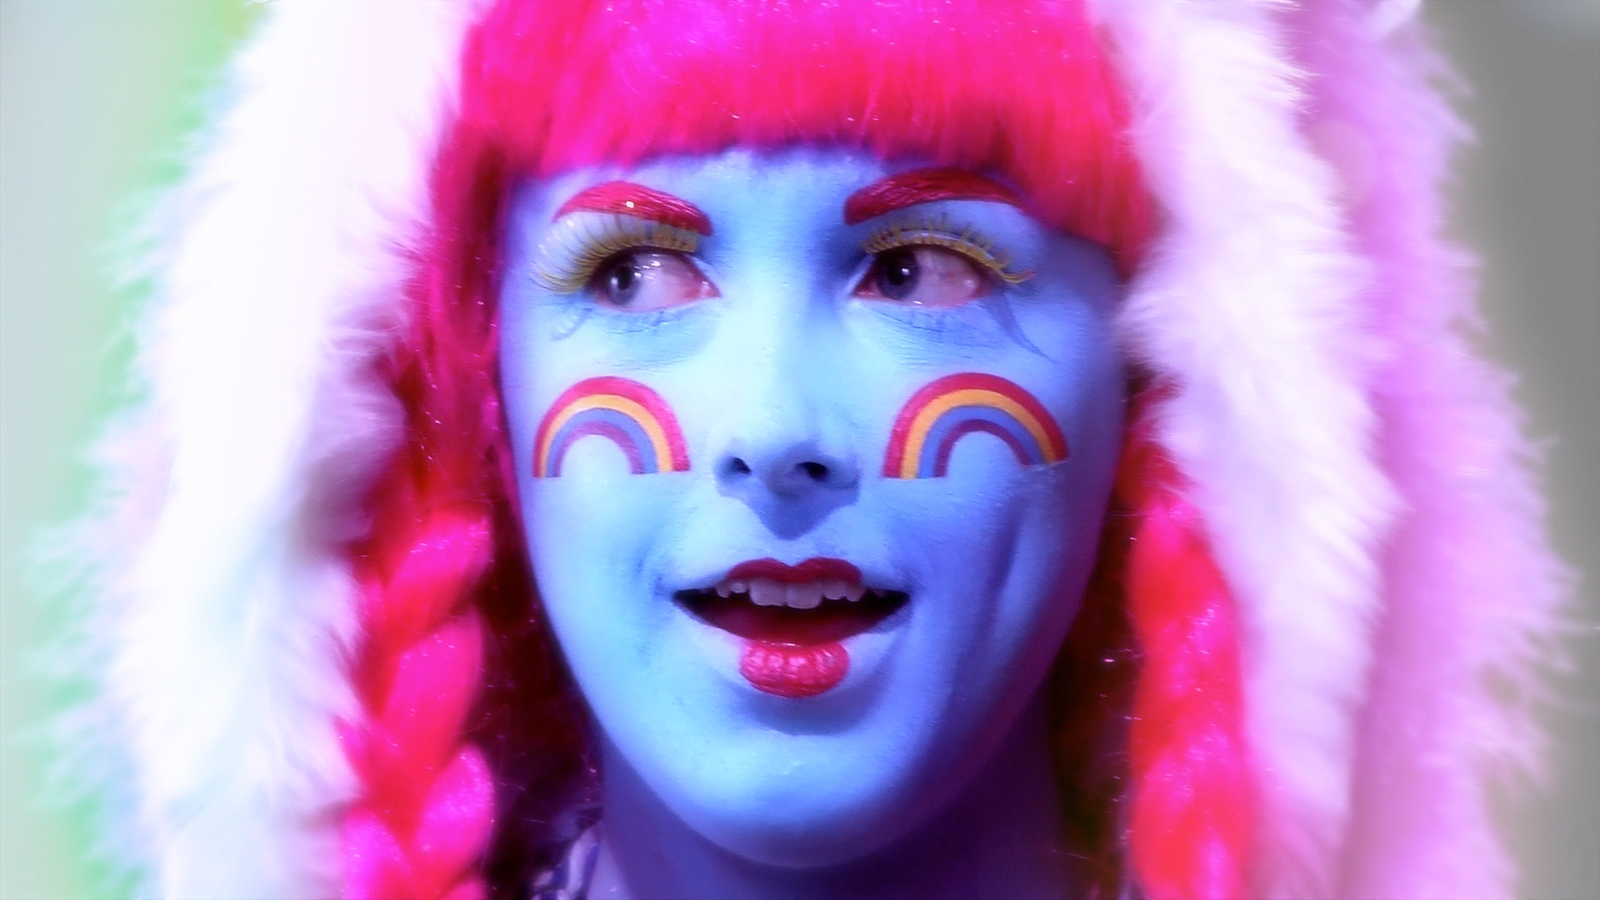 Close up of a woman's face with blue facepaint and rainbows on her cheeks with a bright pink wig